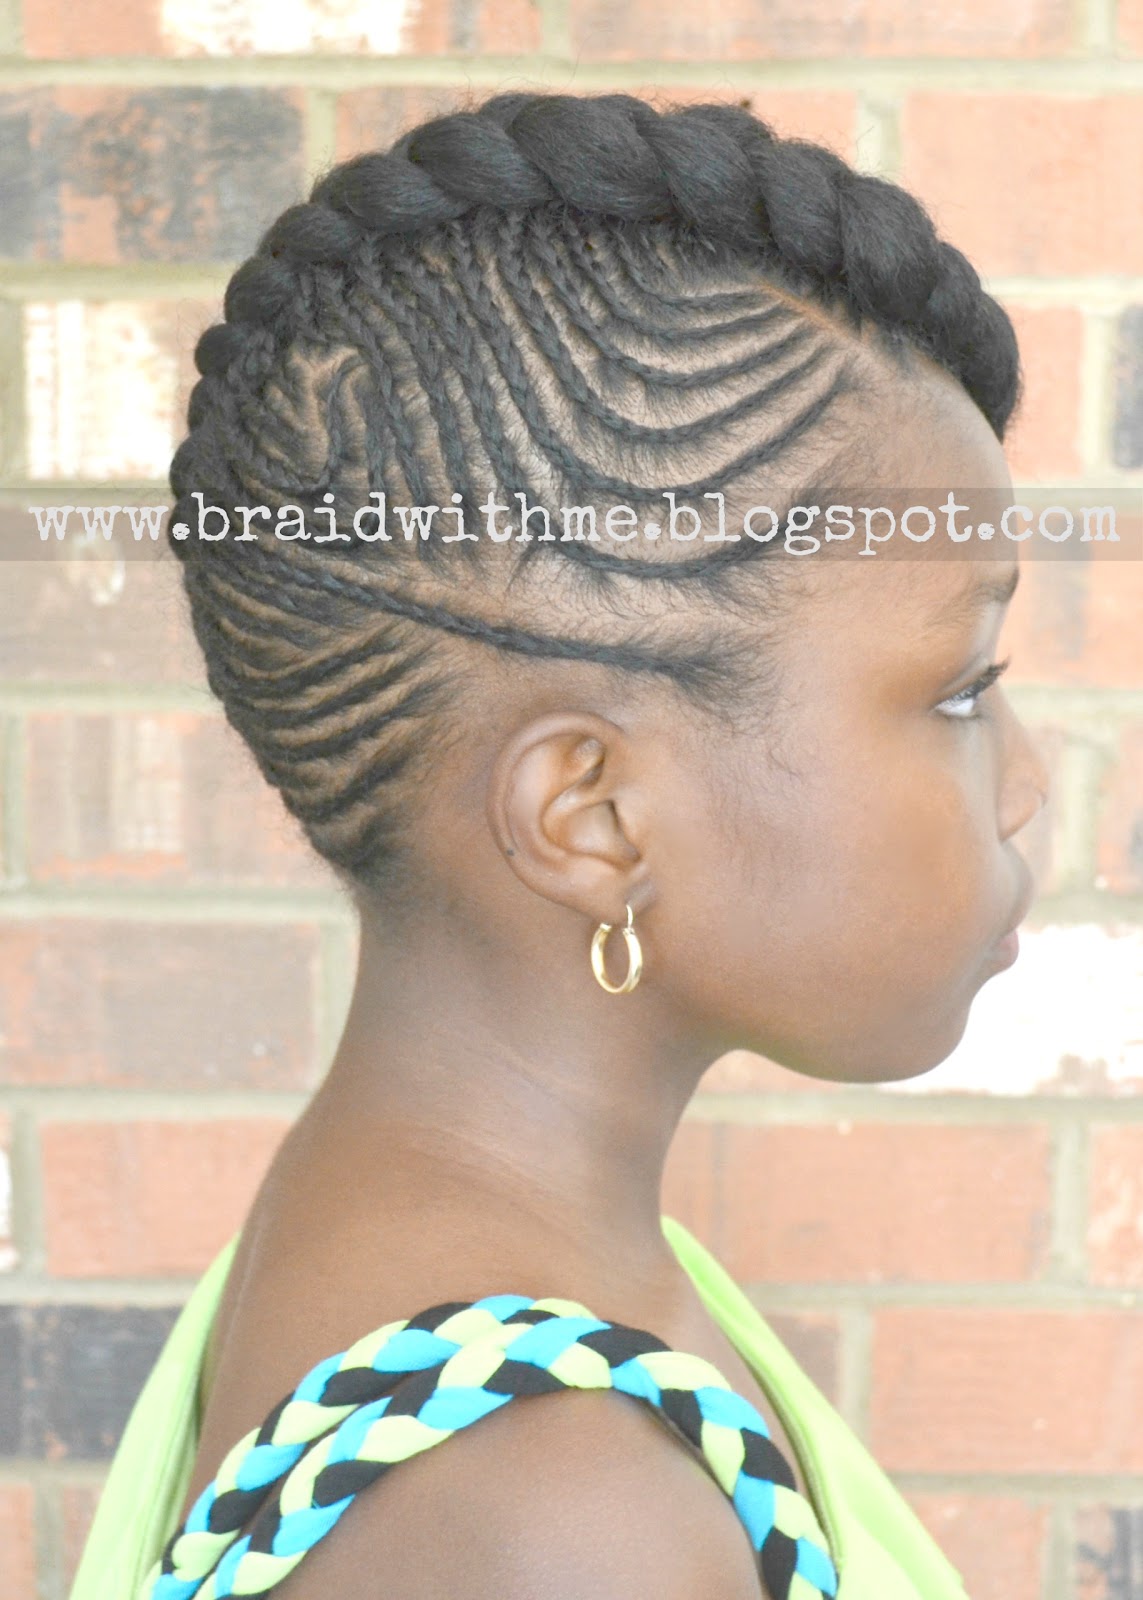 Updo Braided Hairstyles Gallery For Black Women Intricate Cornrow Updo on Natural Hair